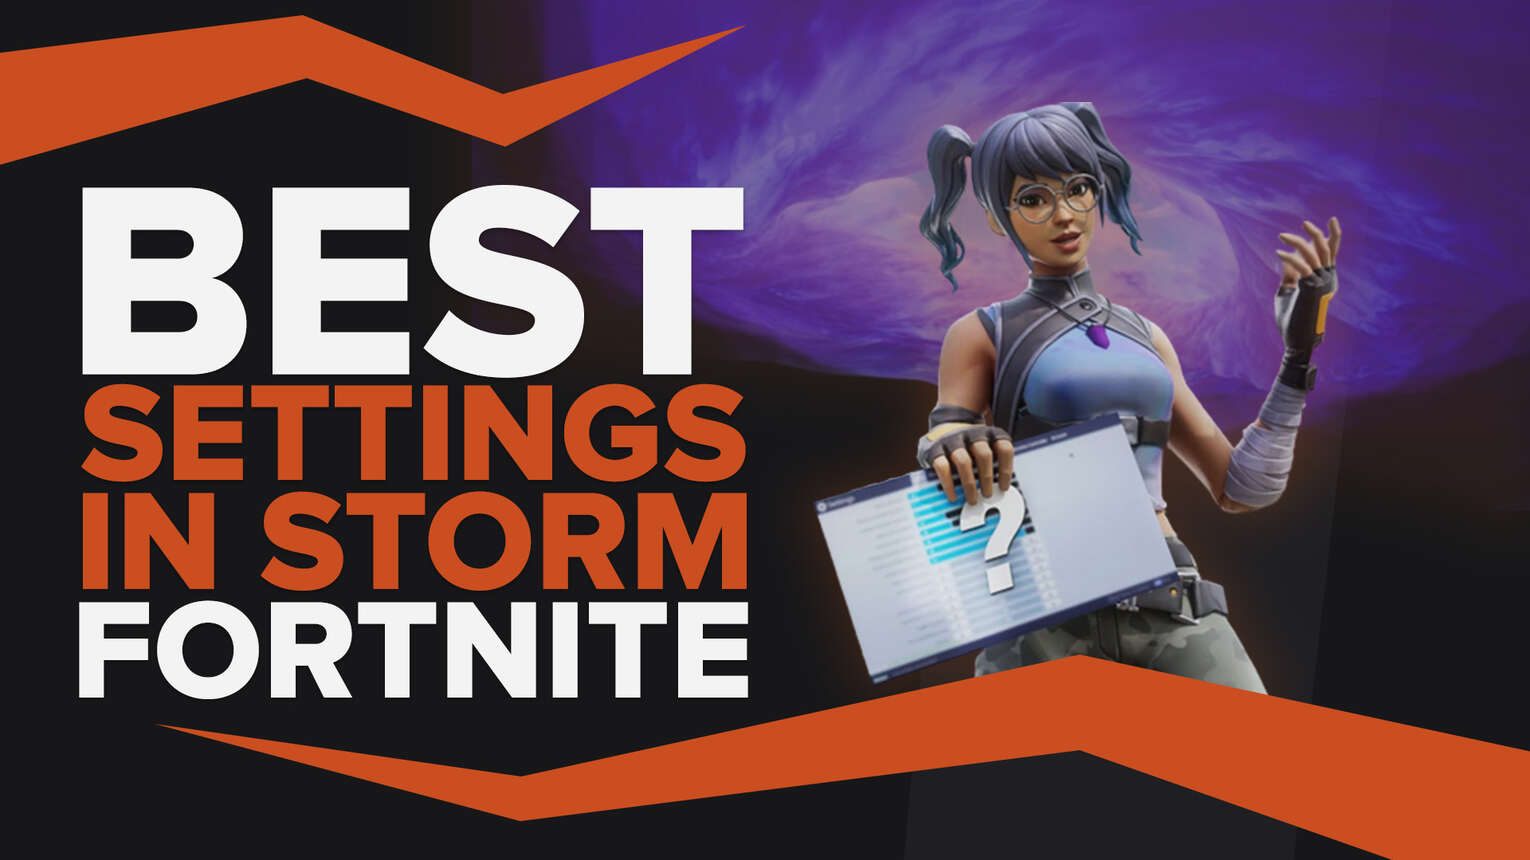 Best Settings To See In The Fortnite Storm